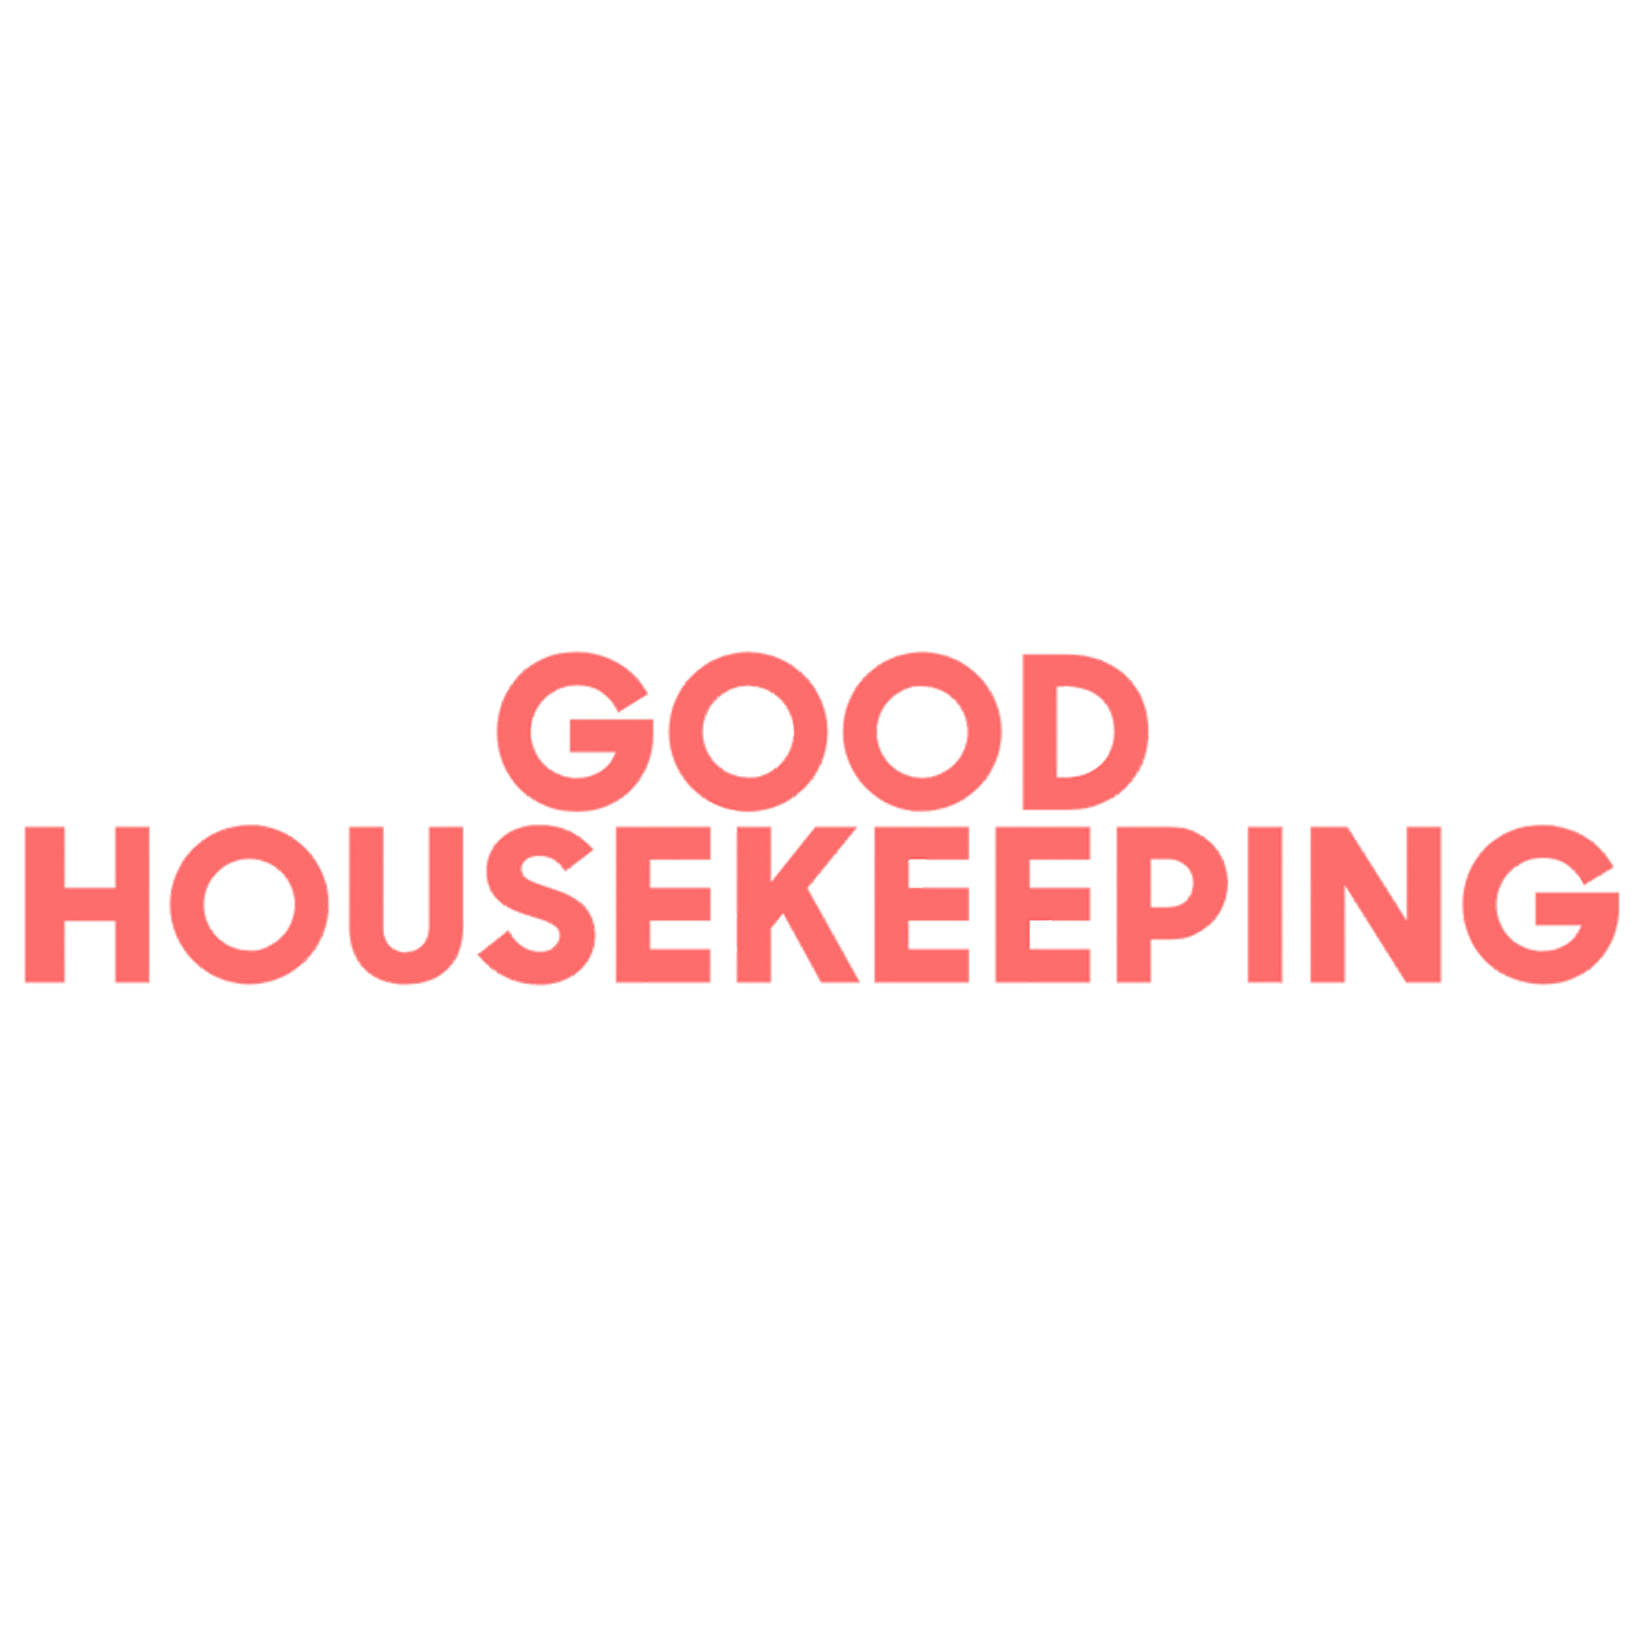 Good Housekeeping First Principle Sign - Get 10% Off Now